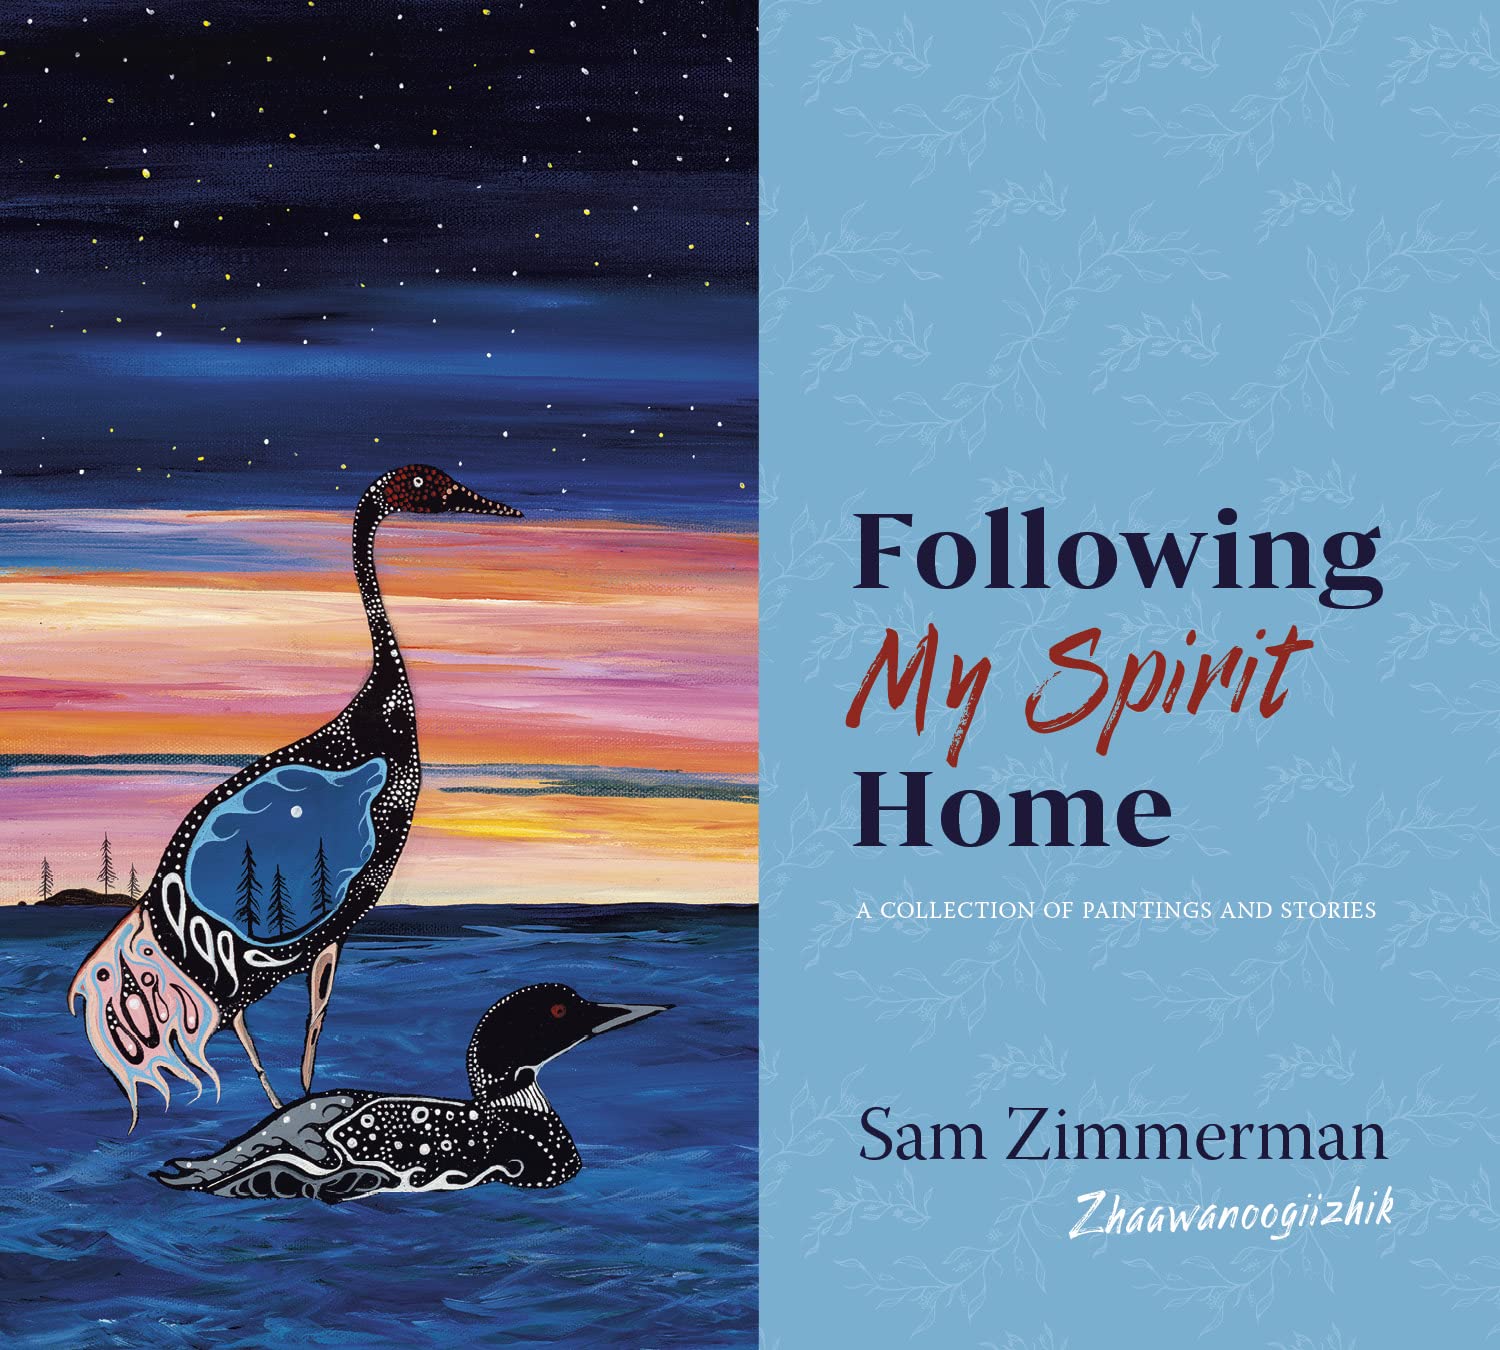 Zimmerman　Collection　Paintings　Books　by　Home:　Following　Birchbark　and　–　A　My　Spirit　Sam　of　Stories